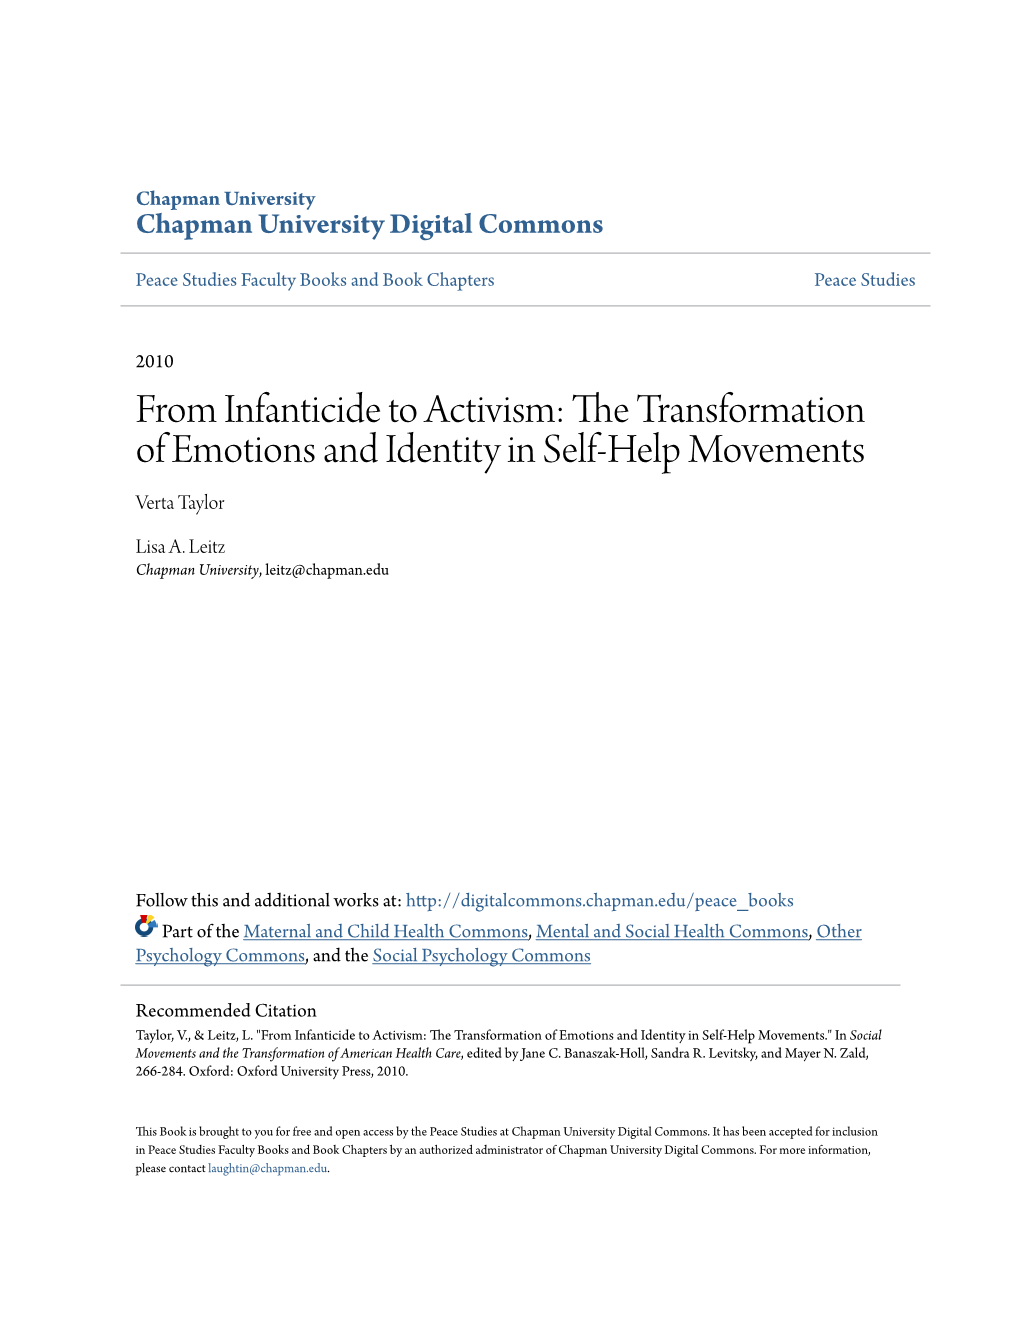 From Infanticide to Activism: the Transformation of Emotions and Identity in Self-Help Movements